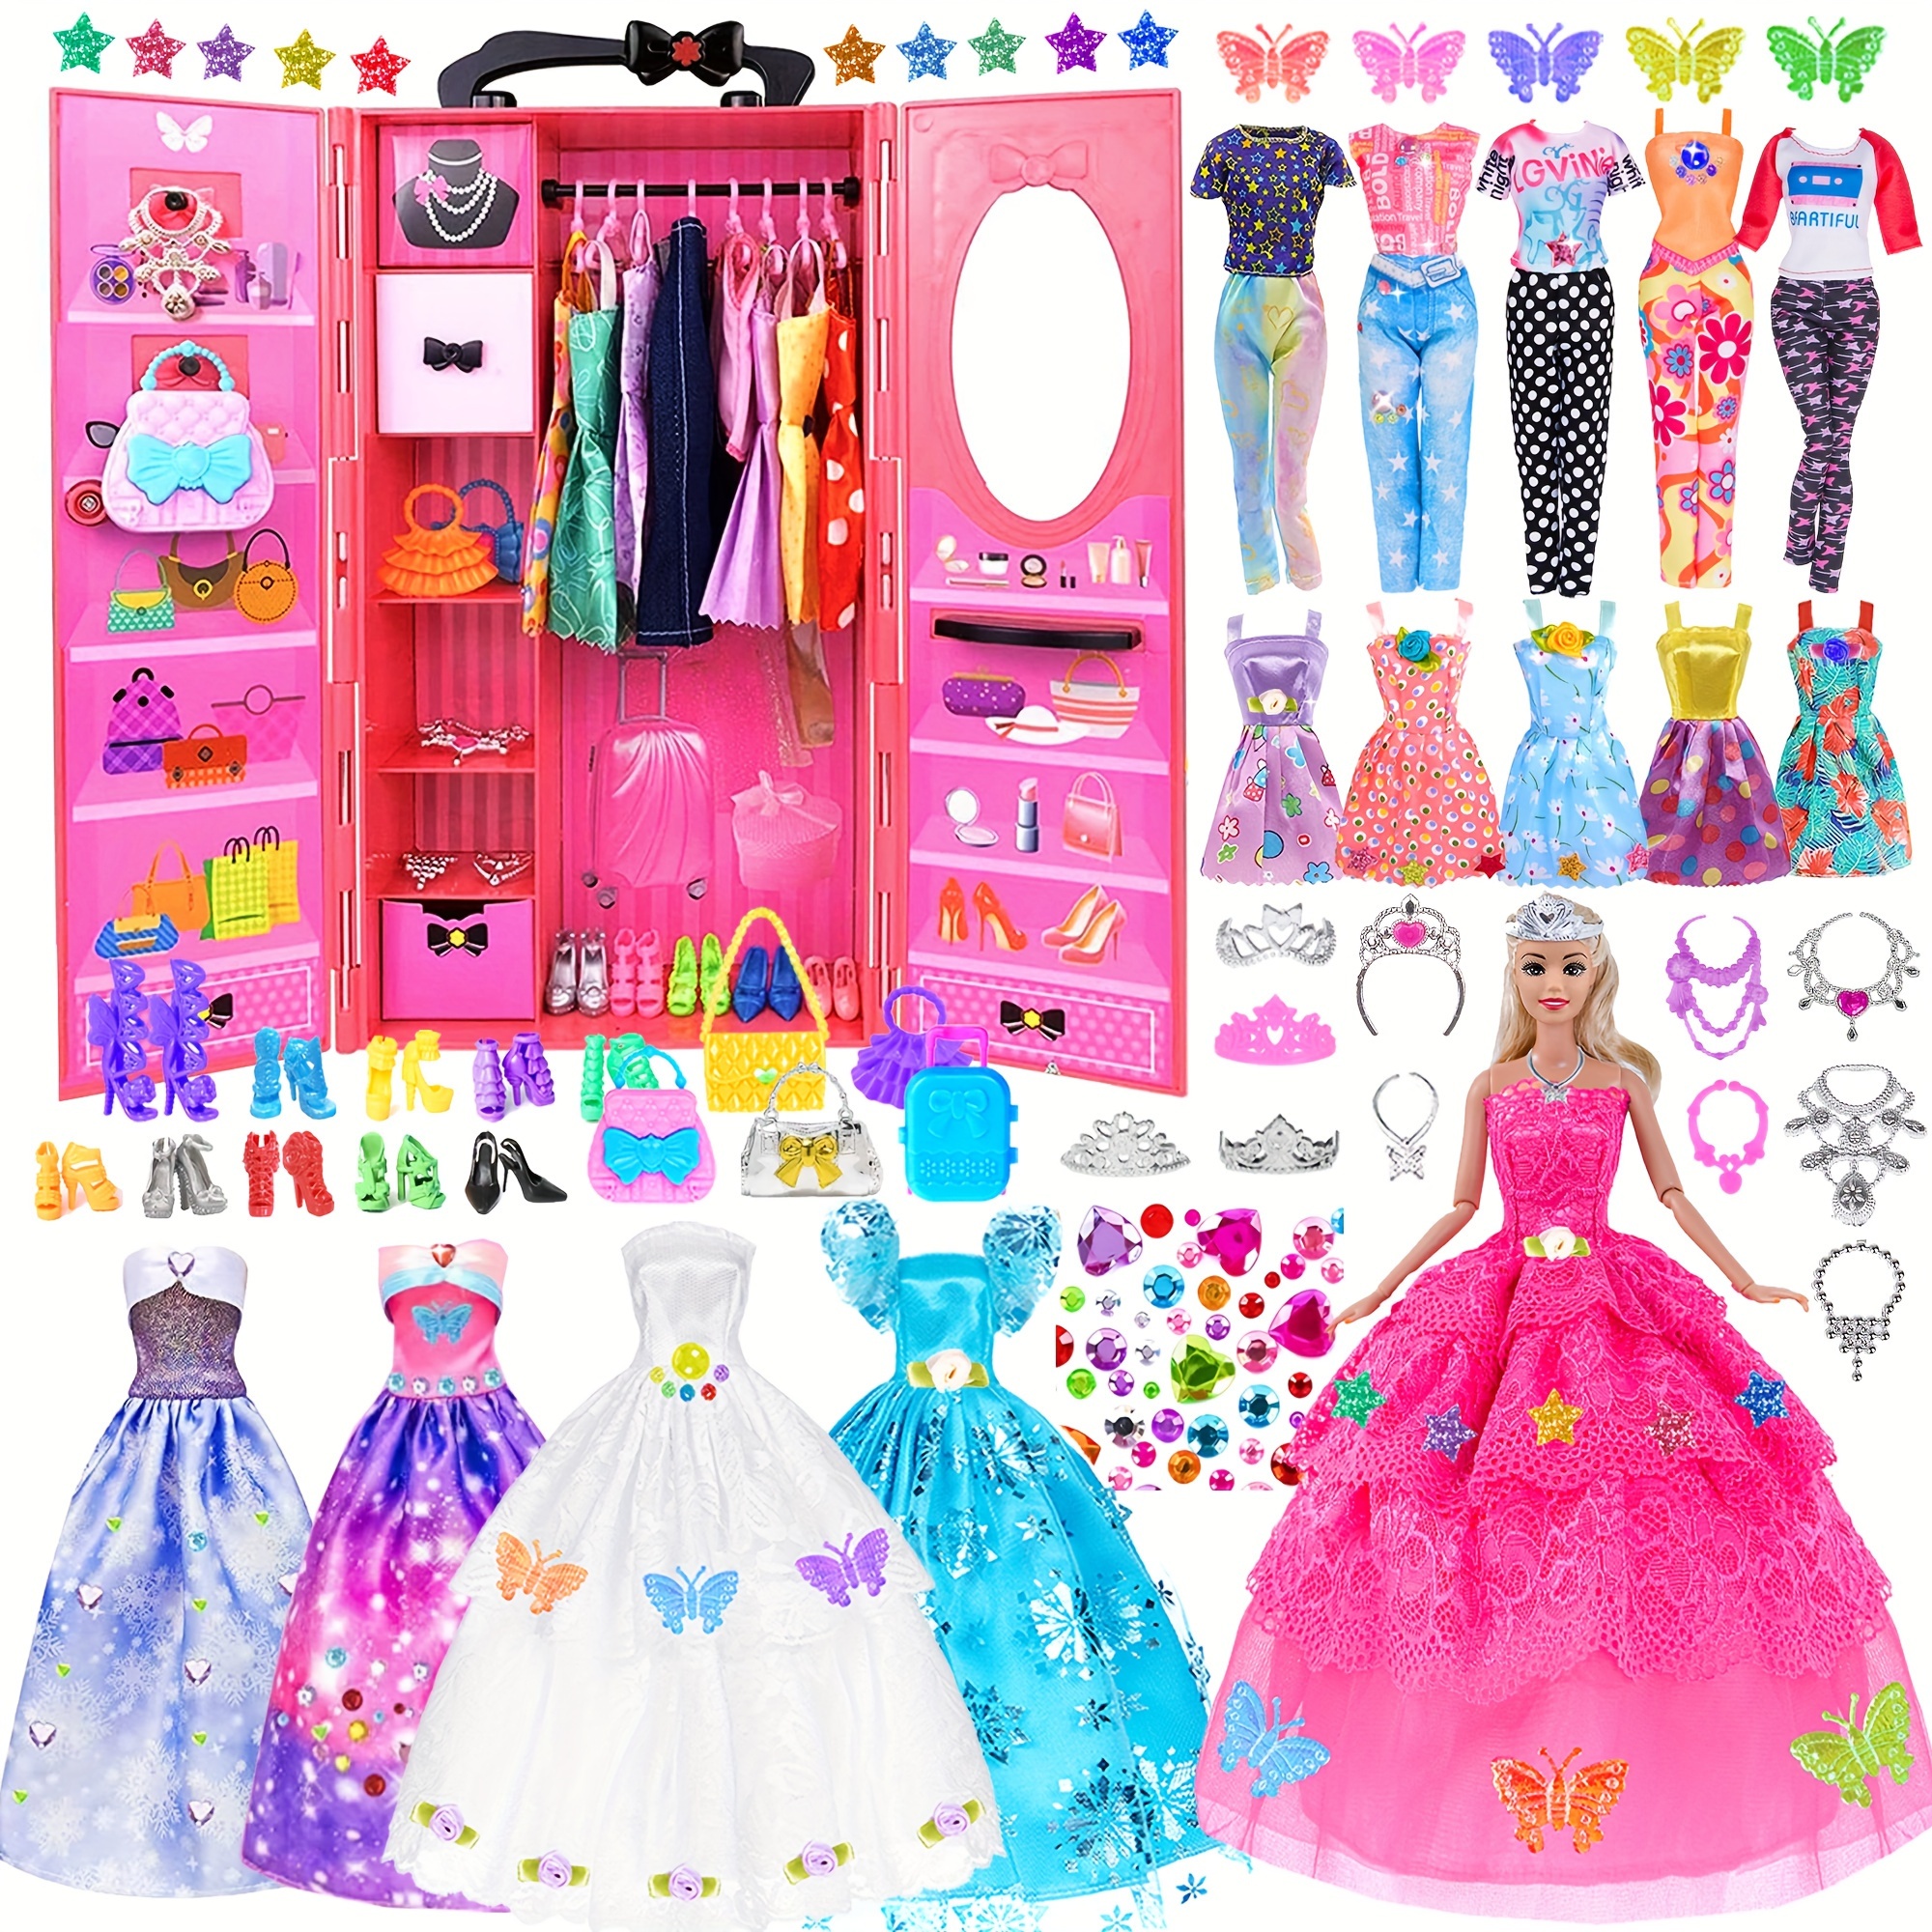 

139 Pack 11.5 Inch Doll And Closet Set Fashion Diy Wardrobe Doll Clothes And Accessories Including Doll, Wardrobe, Wedding Dress, Shoes, Necklace, Bags And More (one Doll)